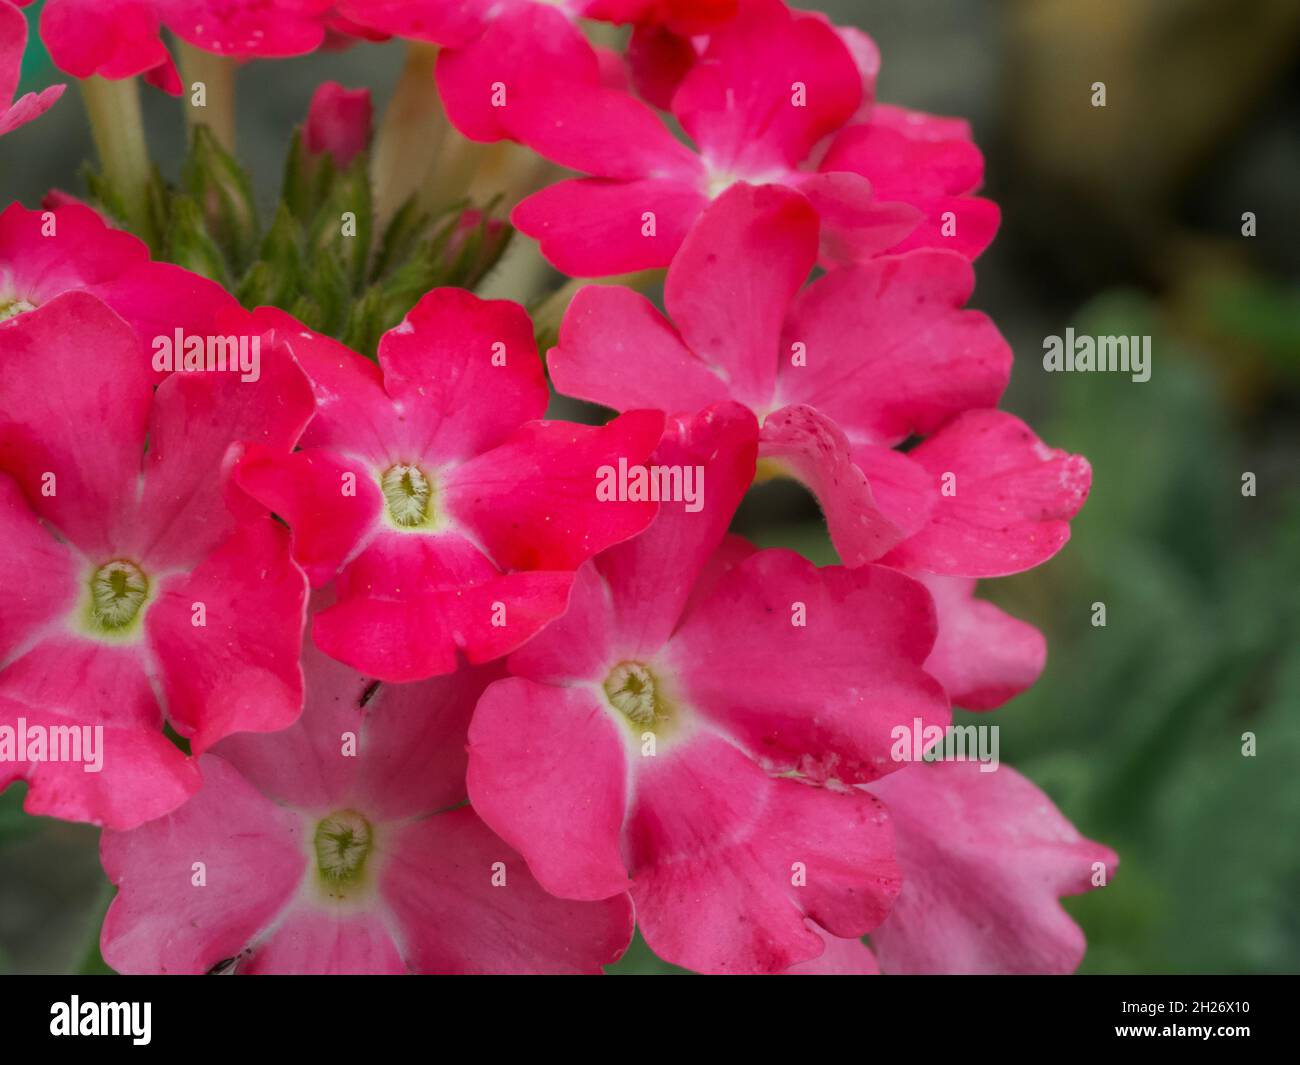 Verbena flowers, close-up shot. An inflorescence of small pink flowers. Stock Photo